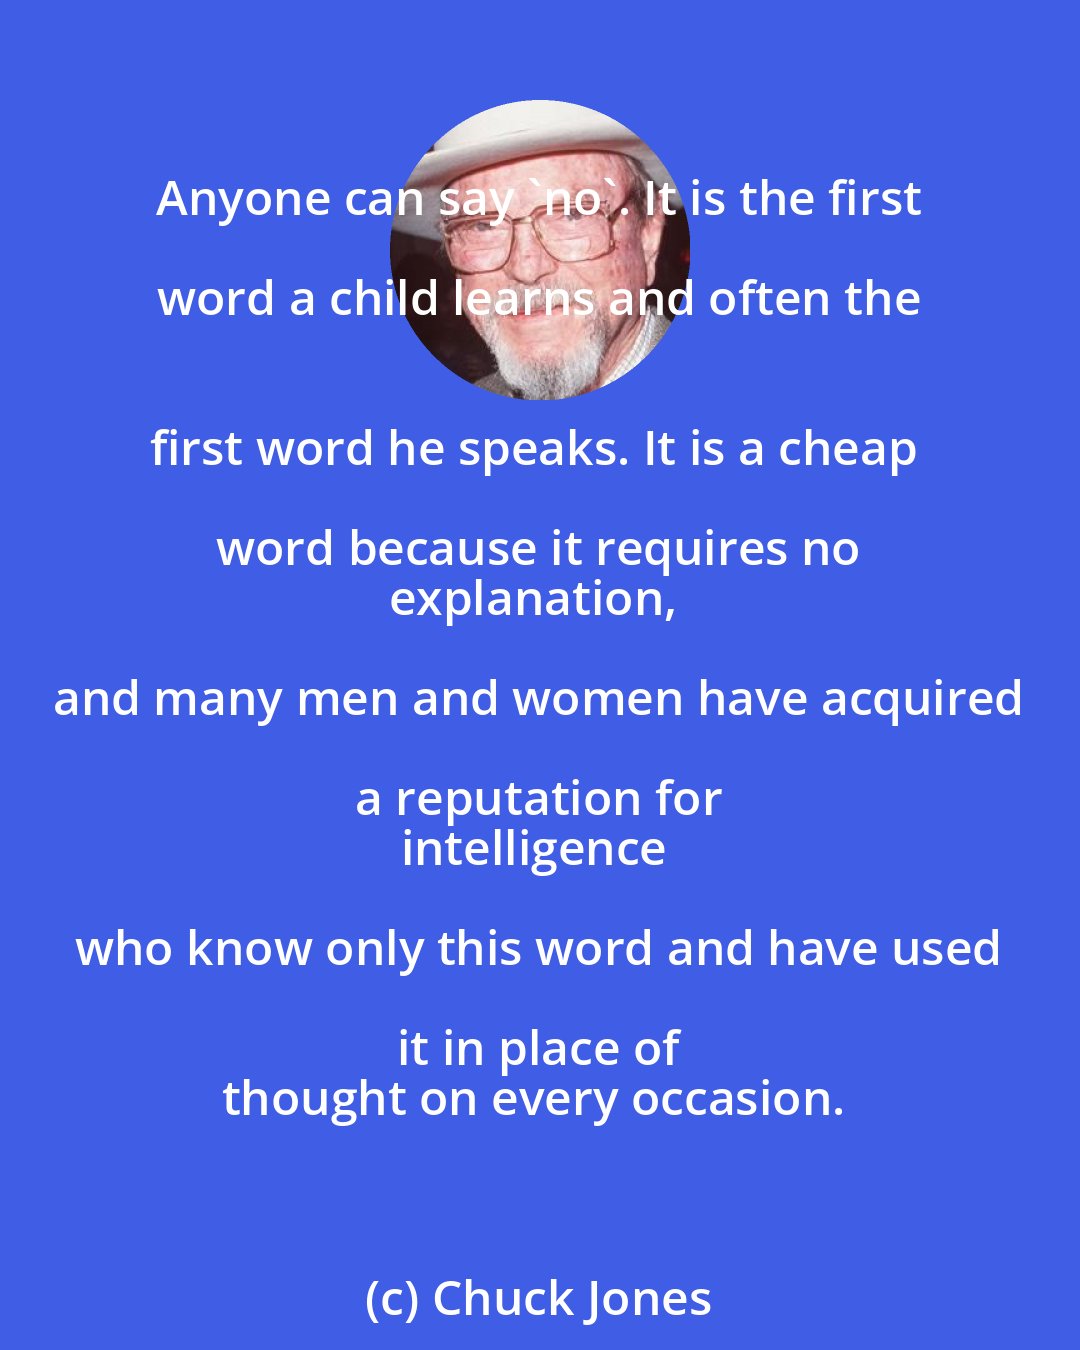 Chuck Jones: Anyone can say 'no'. It is the first word a child learns and often the 
first word he speaks. It is a cheap word because it requires no 
explanation, and many men and women have acquired a reputation for 
intelligence who know only this word and have used it in place of 
thought on every occasion.